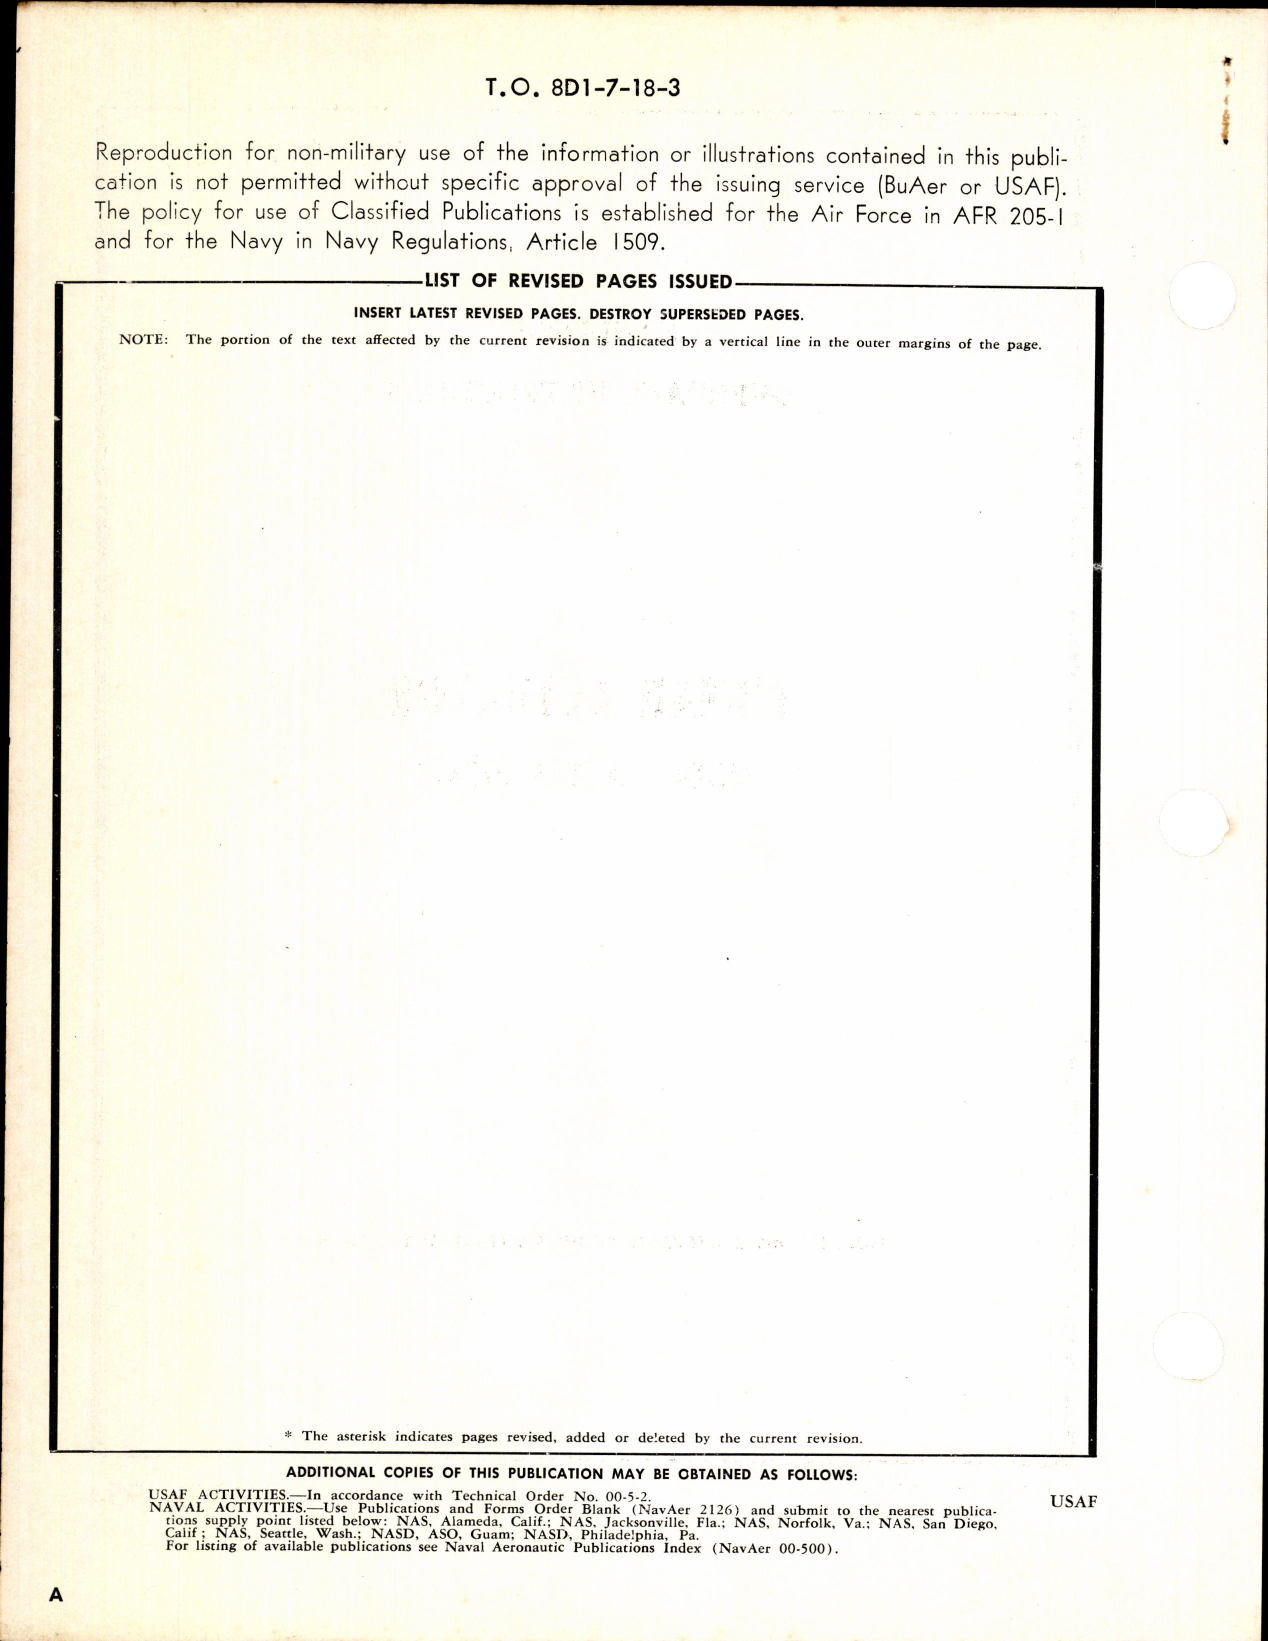 Sample page 2 from AirCorps Library document: Linear Actuator Model ACT-A-1954-1